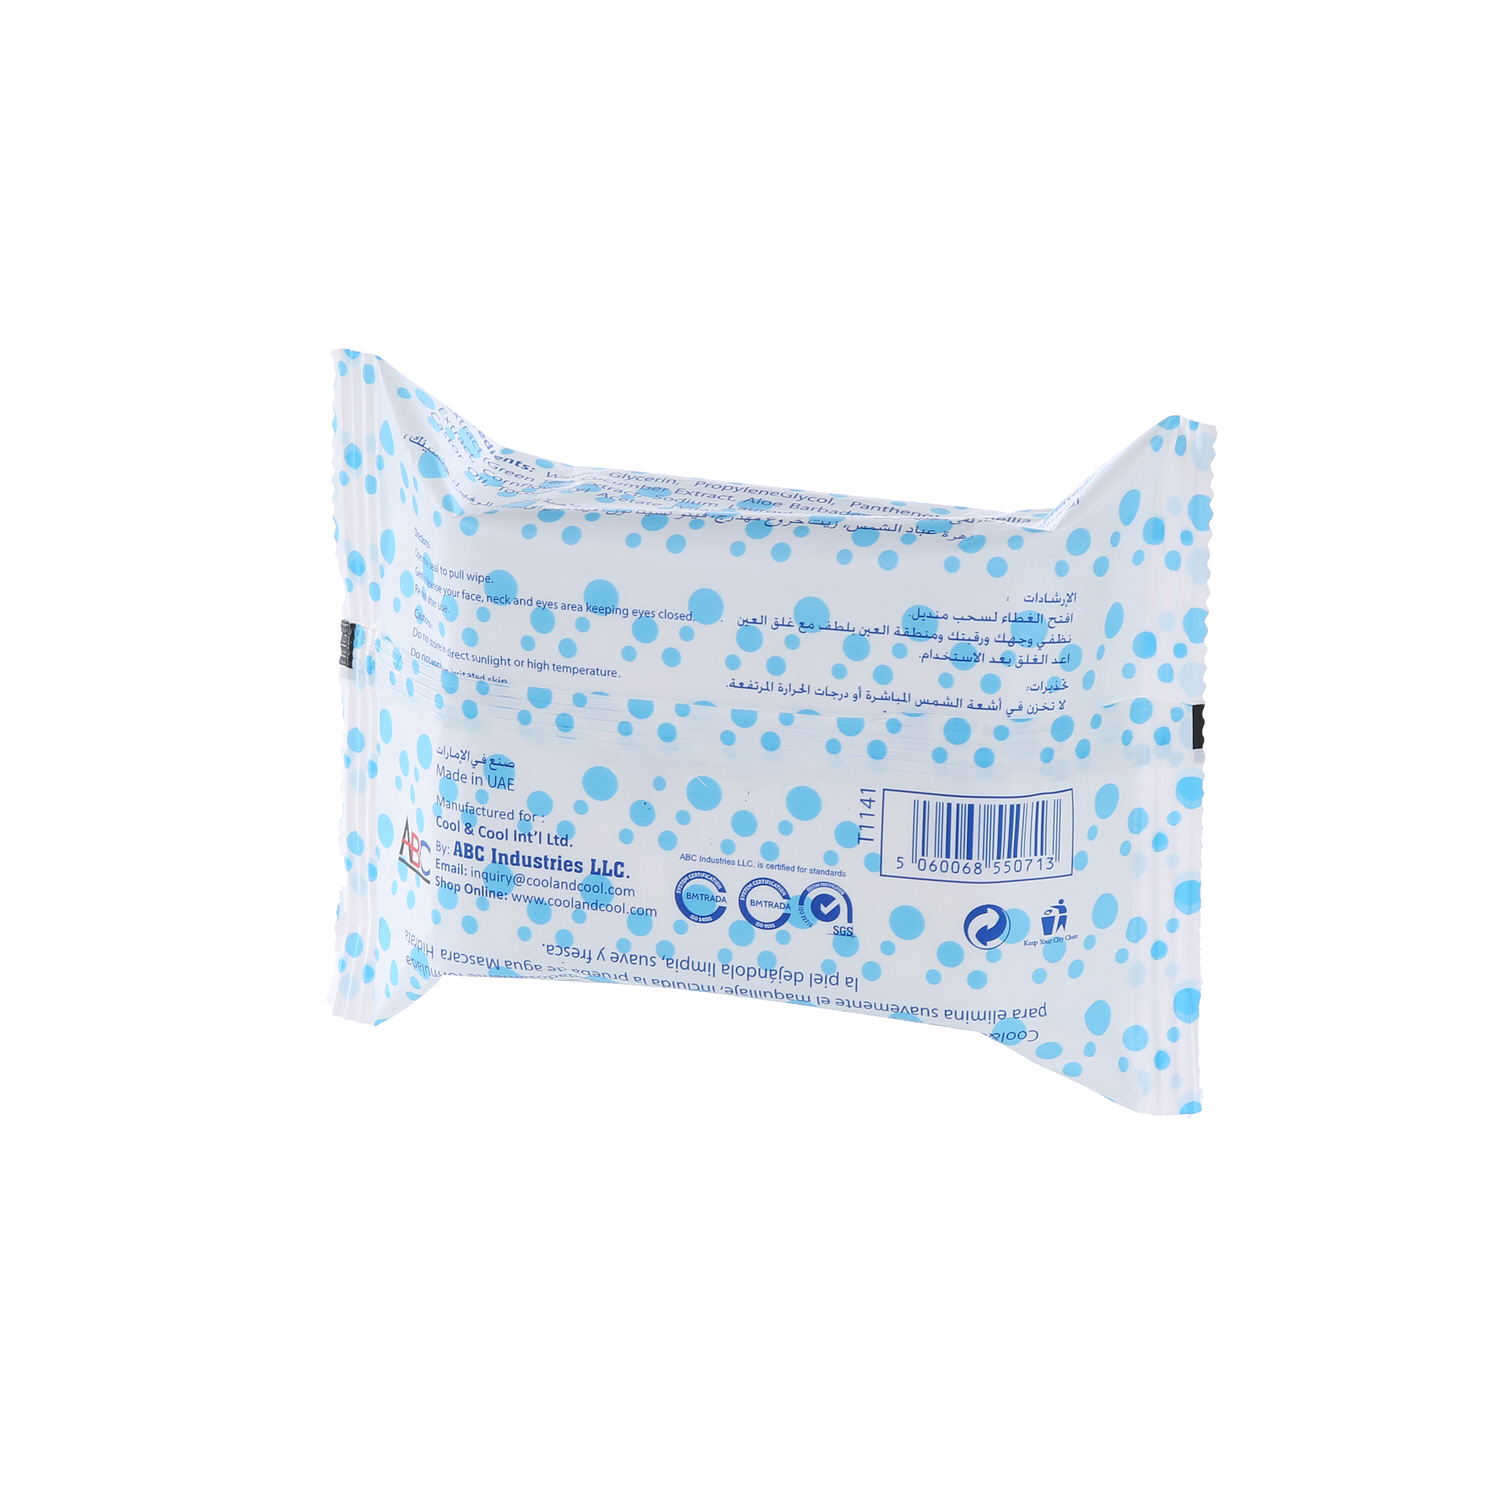 Cool & Cool Makeup Remover Tissue 33 Wipes